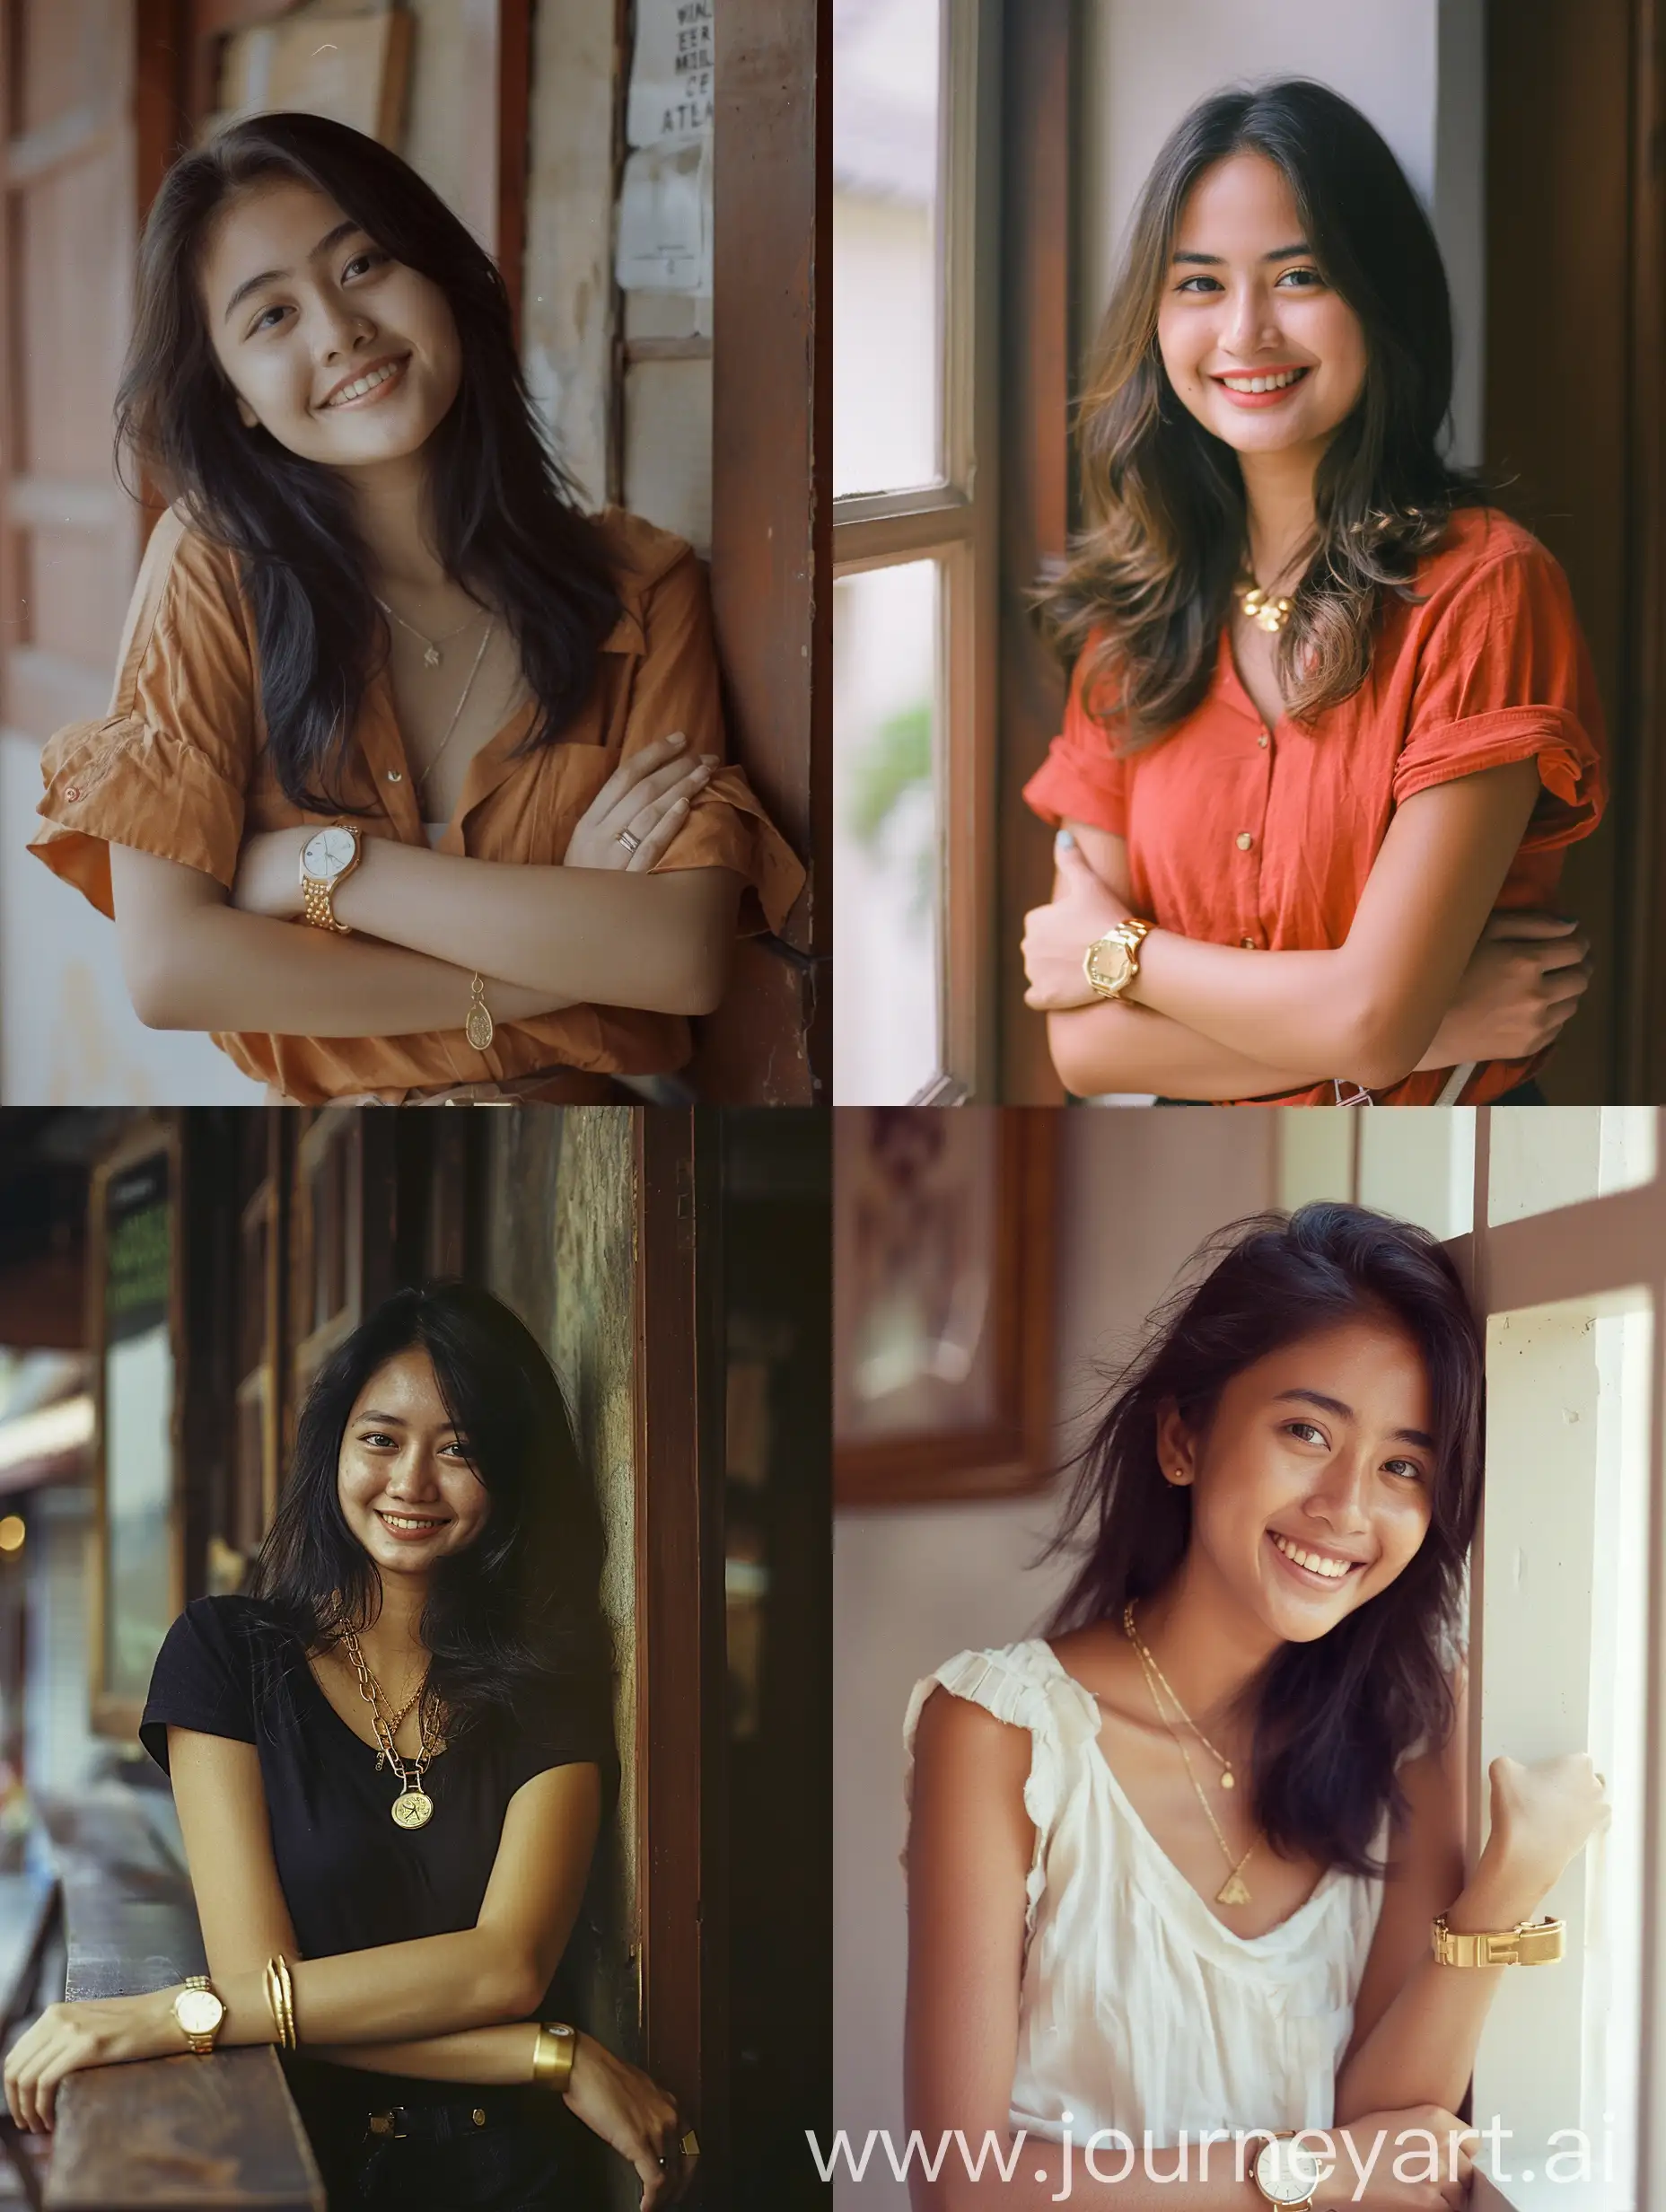 Cinematic-Indonesian-Woman-Smiling-with-Gold-Watch-in-Warm-Atmosphere